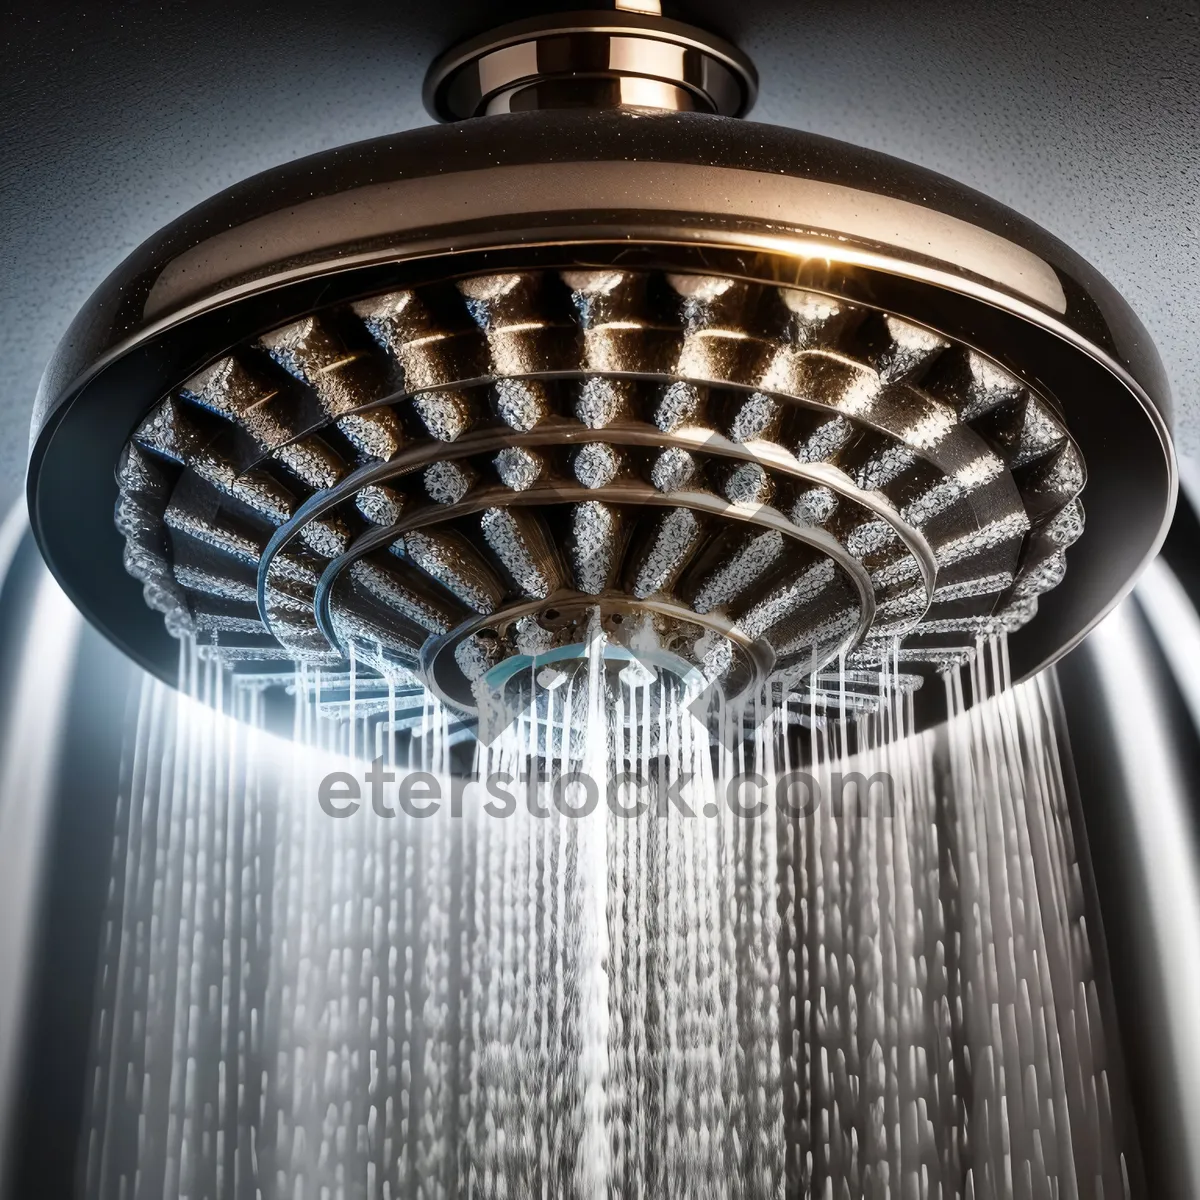 Picture of Shower Fixture with Architectural Lampshade and Fountain Chime